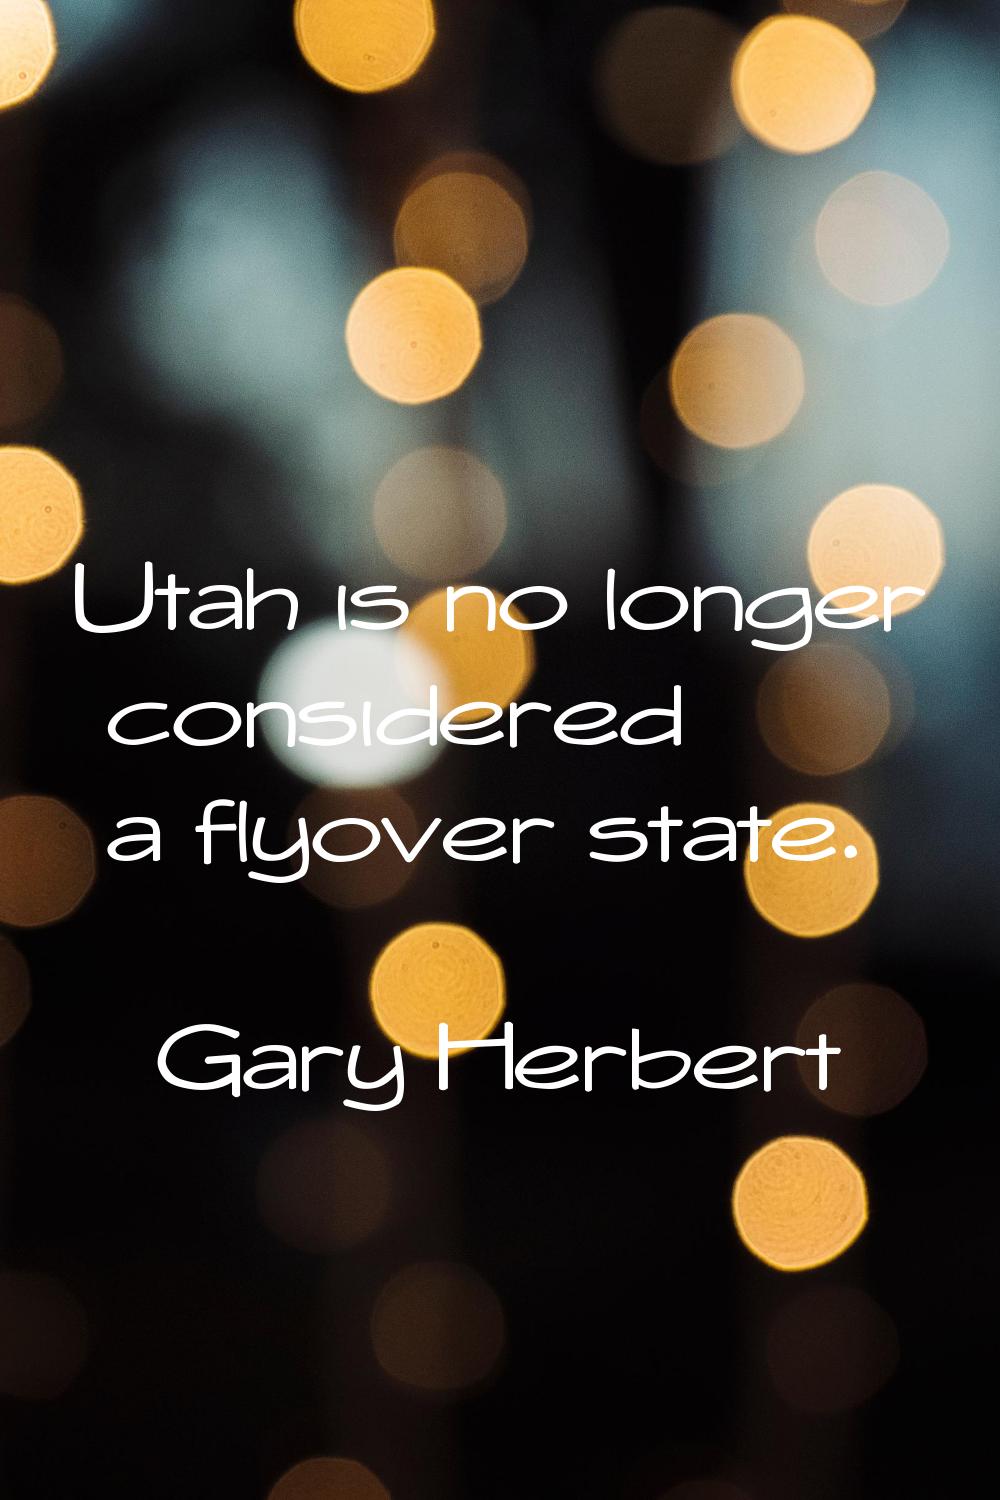 Utah is no longer considered a flyover state.